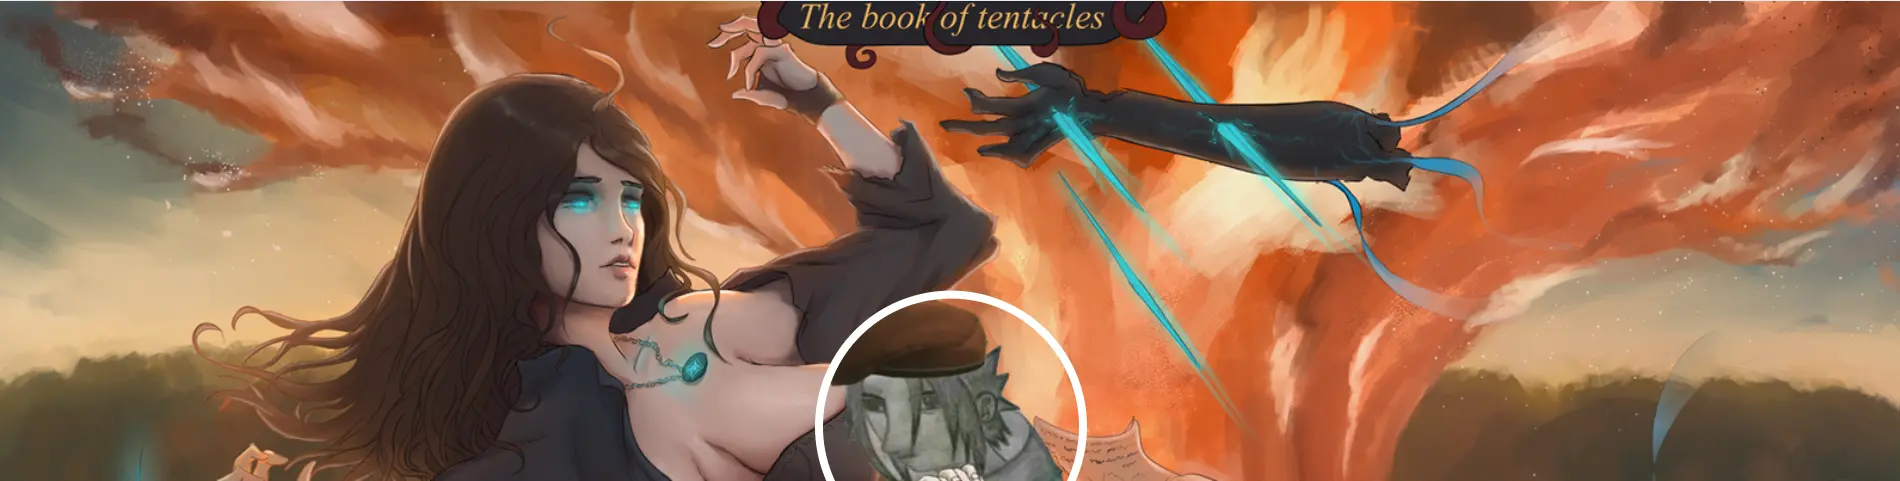 The book of tentacles [v1.1] main image